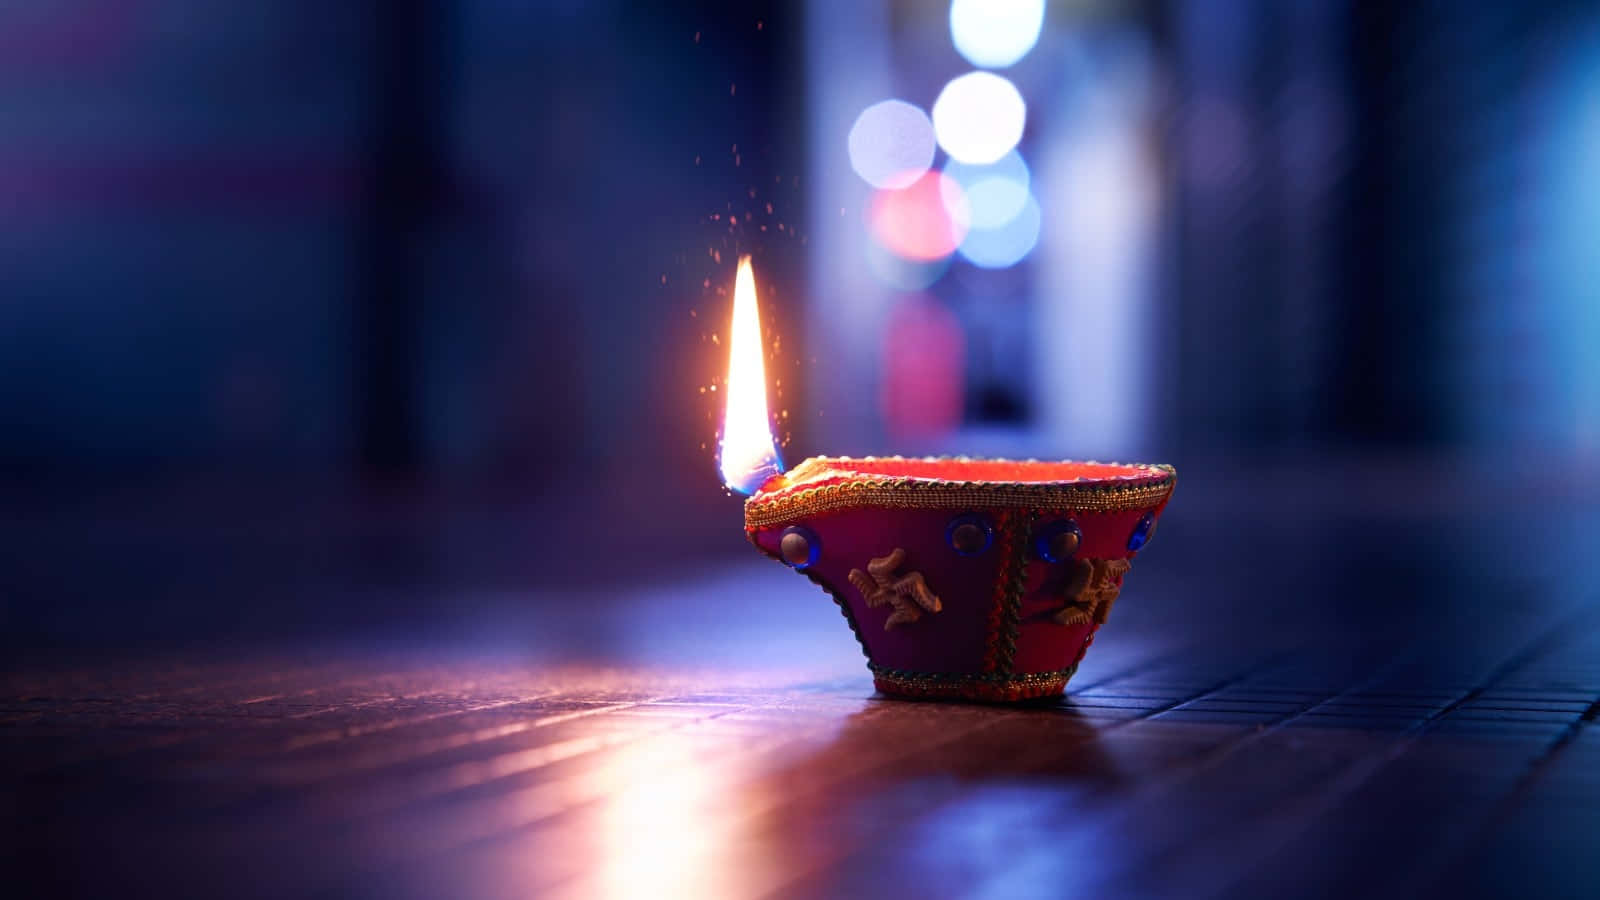 Celebrate Diwali with friends and family!